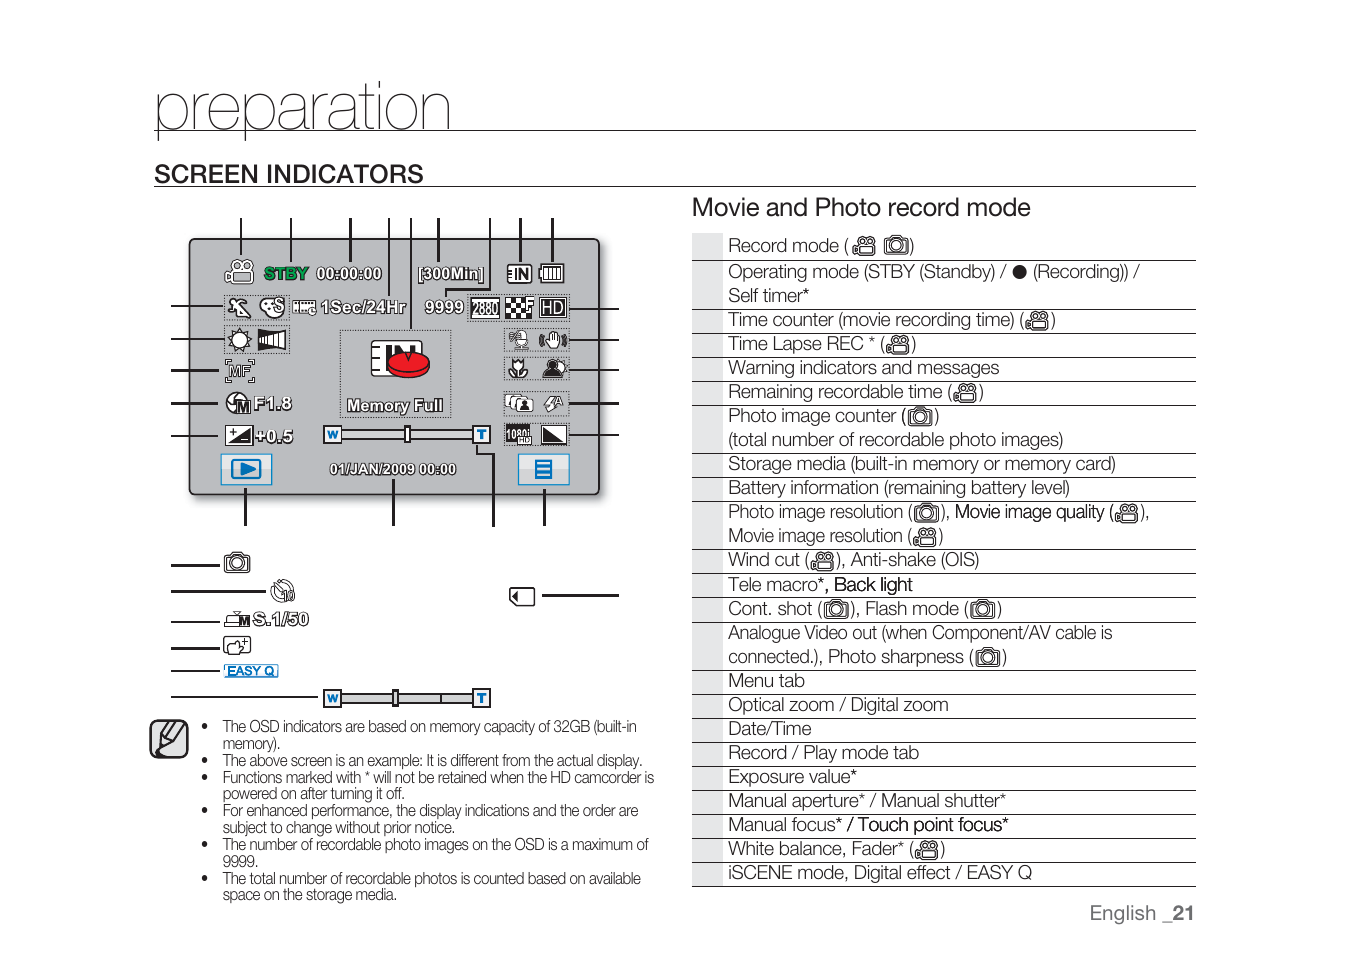 Preparation, Screen indicators, Movie and photo record mode | Samsung HMX-H1062SP User Manual | Page 31 / 144